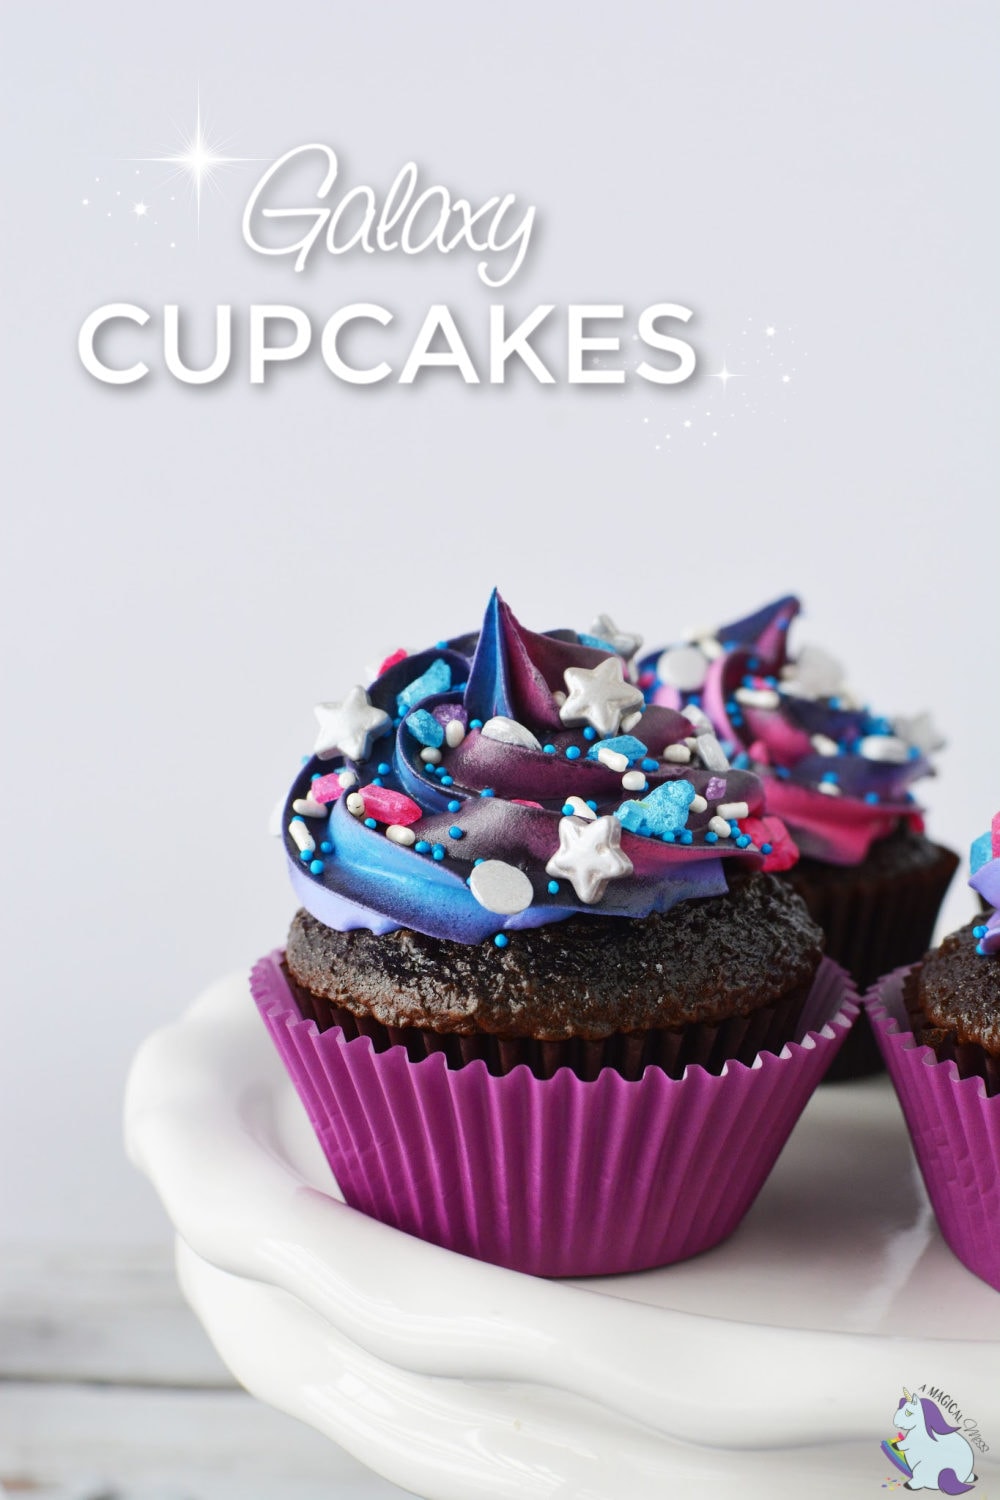 Galaxy cupcakes with sprinkles